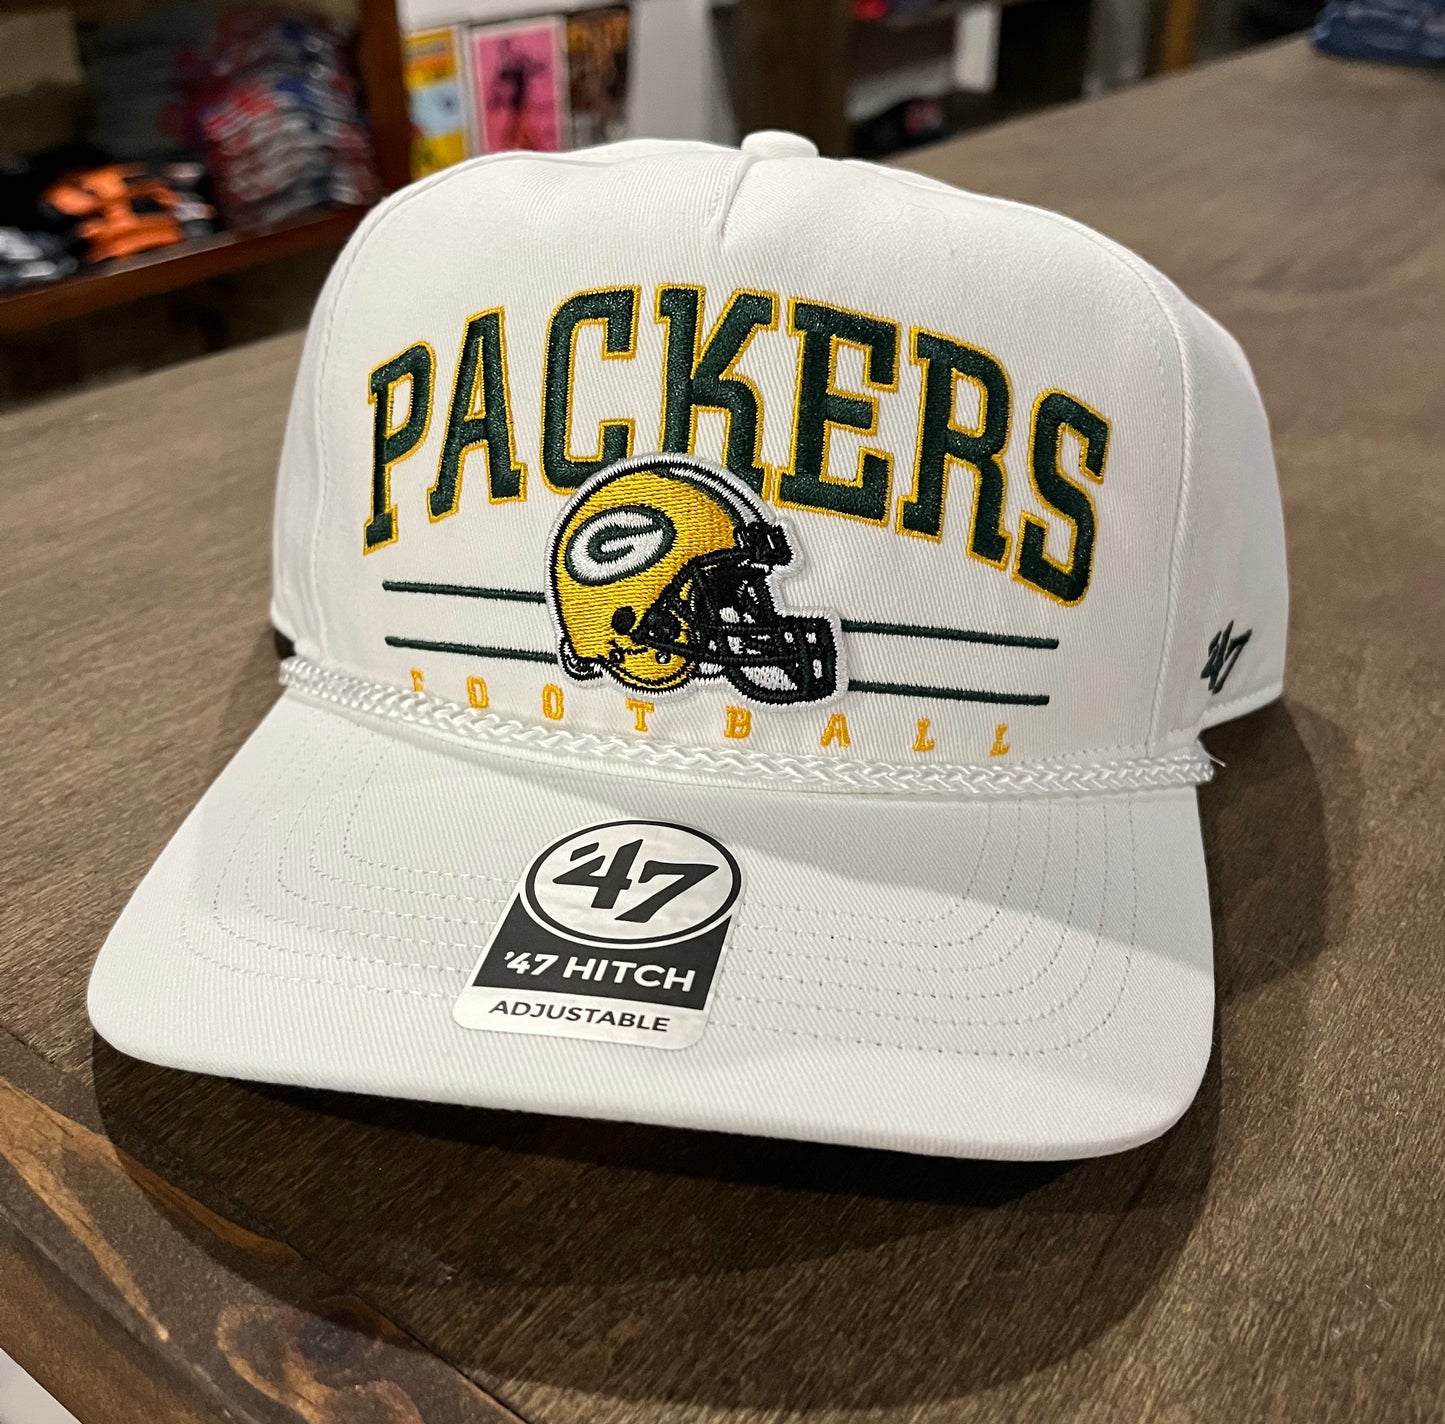 Green Bay Packers Roscoe Hitch Hat - 47 Brand